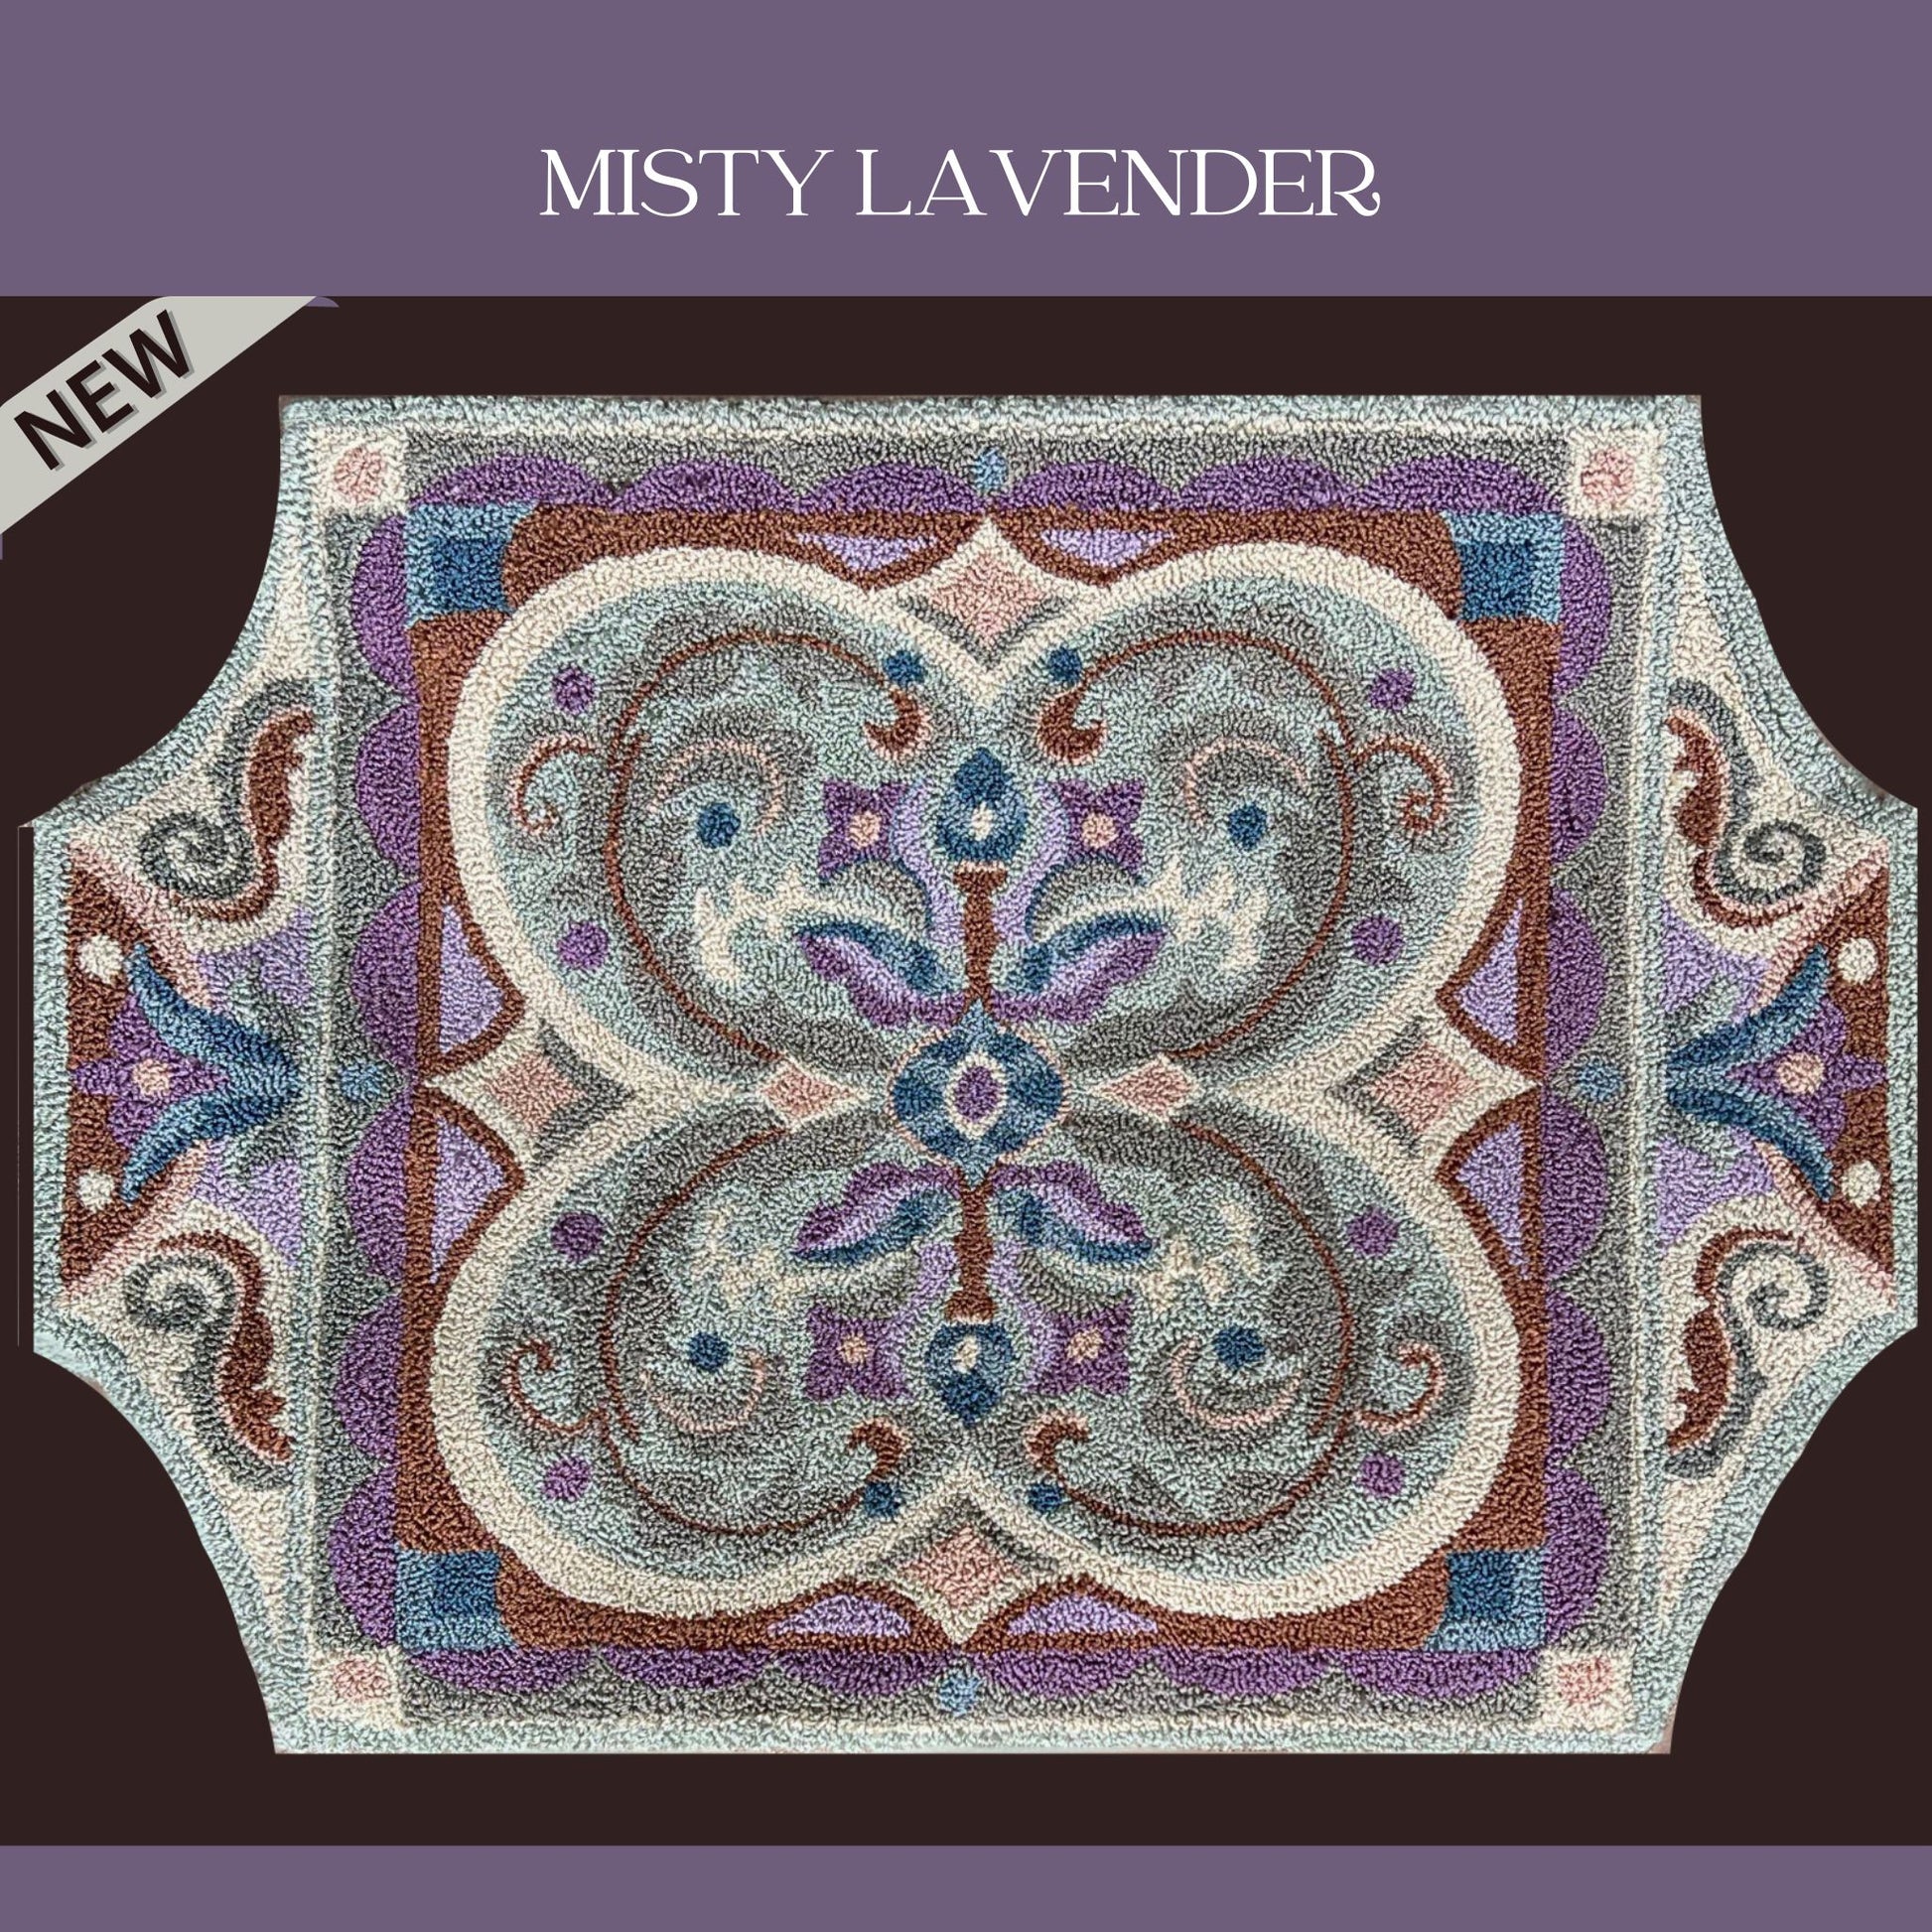  This MISTY LAVENDER Punch Needle Pattern by Orphaned Wool is a wonderful design that is a large size design perfect for the experienced punch needle artist, pattern available as a paper or cloth pattern. This pattern is copyrighted 2023 by Kelly Kanyok of Orphaned Wool- All Rights Reserved.